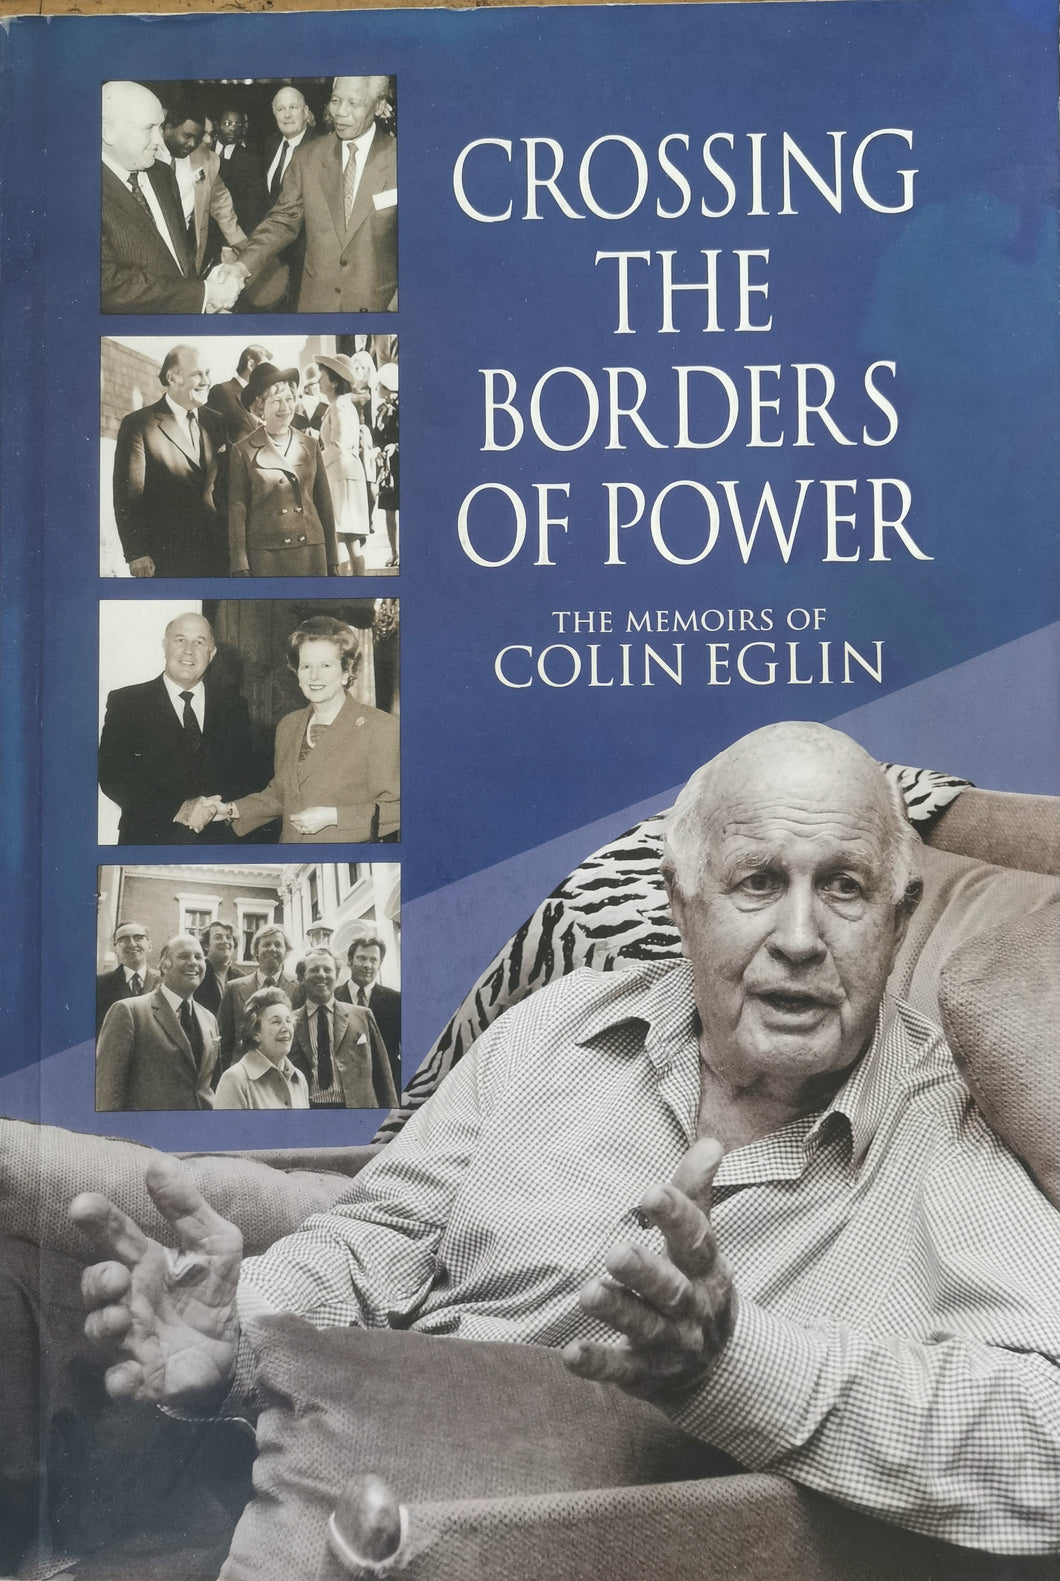 Colin Elgin - Crossing the Borders of Power